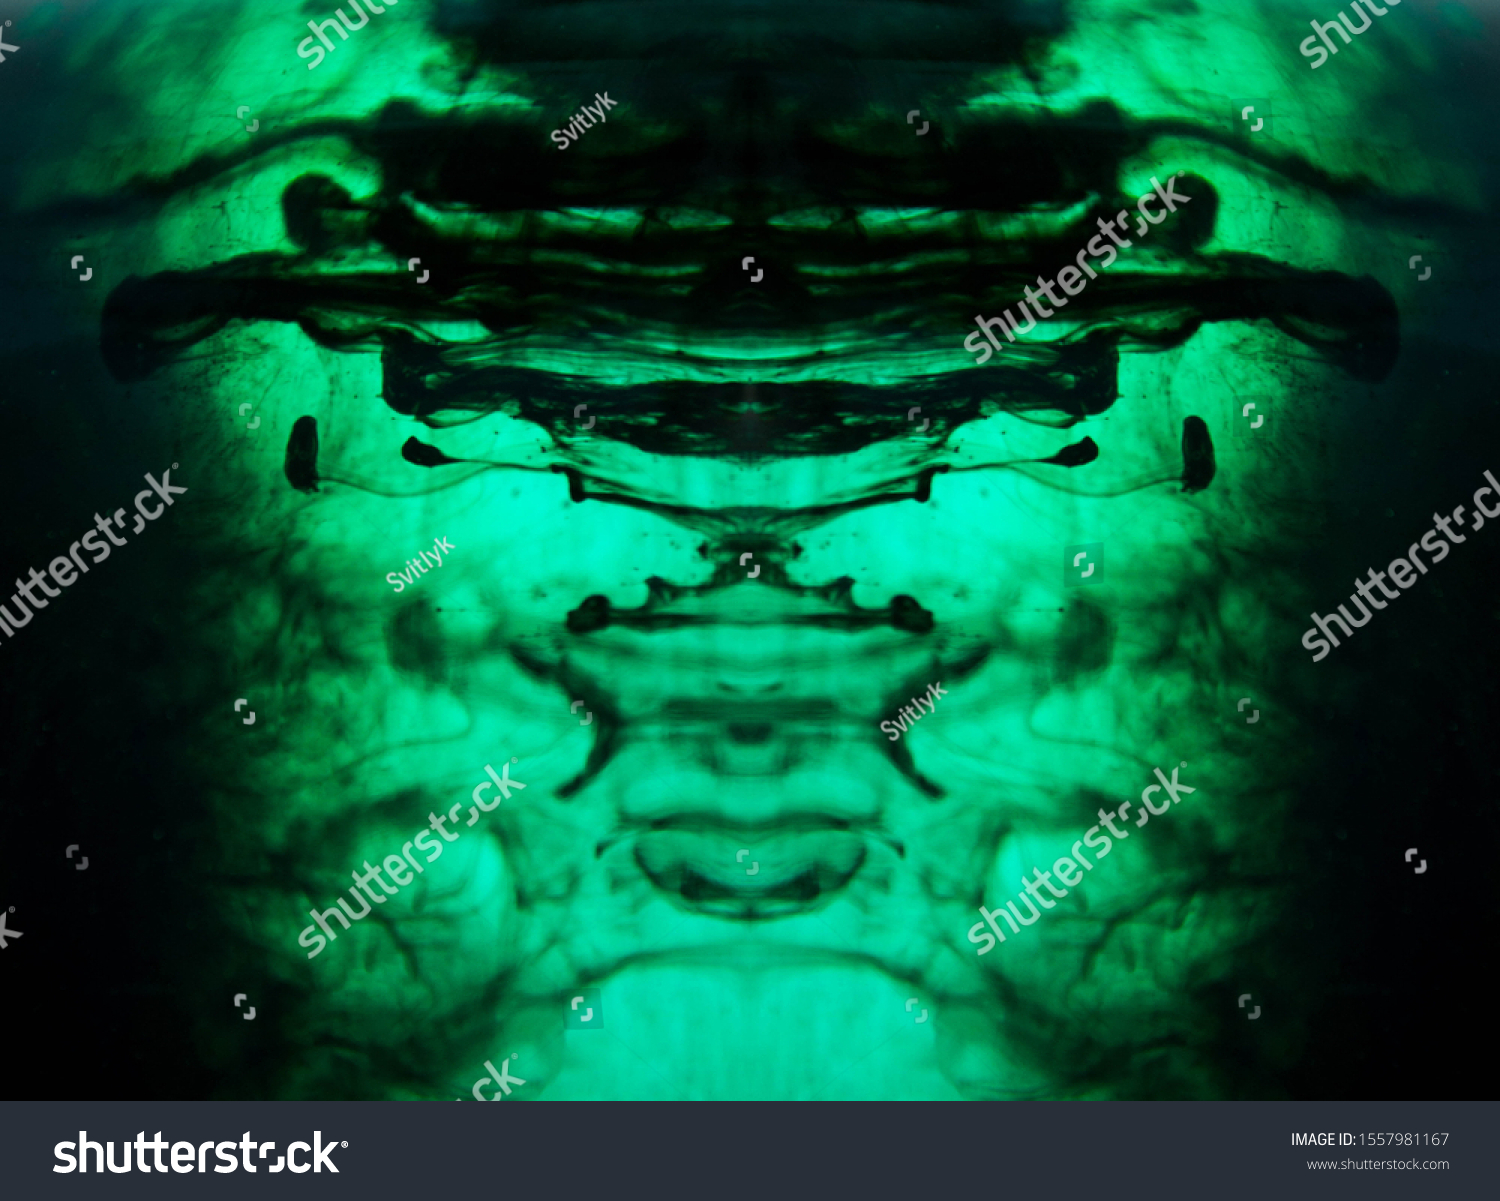 Blurred abstract background. Colorful inks in the water. Splash paint mixing. Watercolor effects. Ink pattern in Rorschach test style.  #1557981167